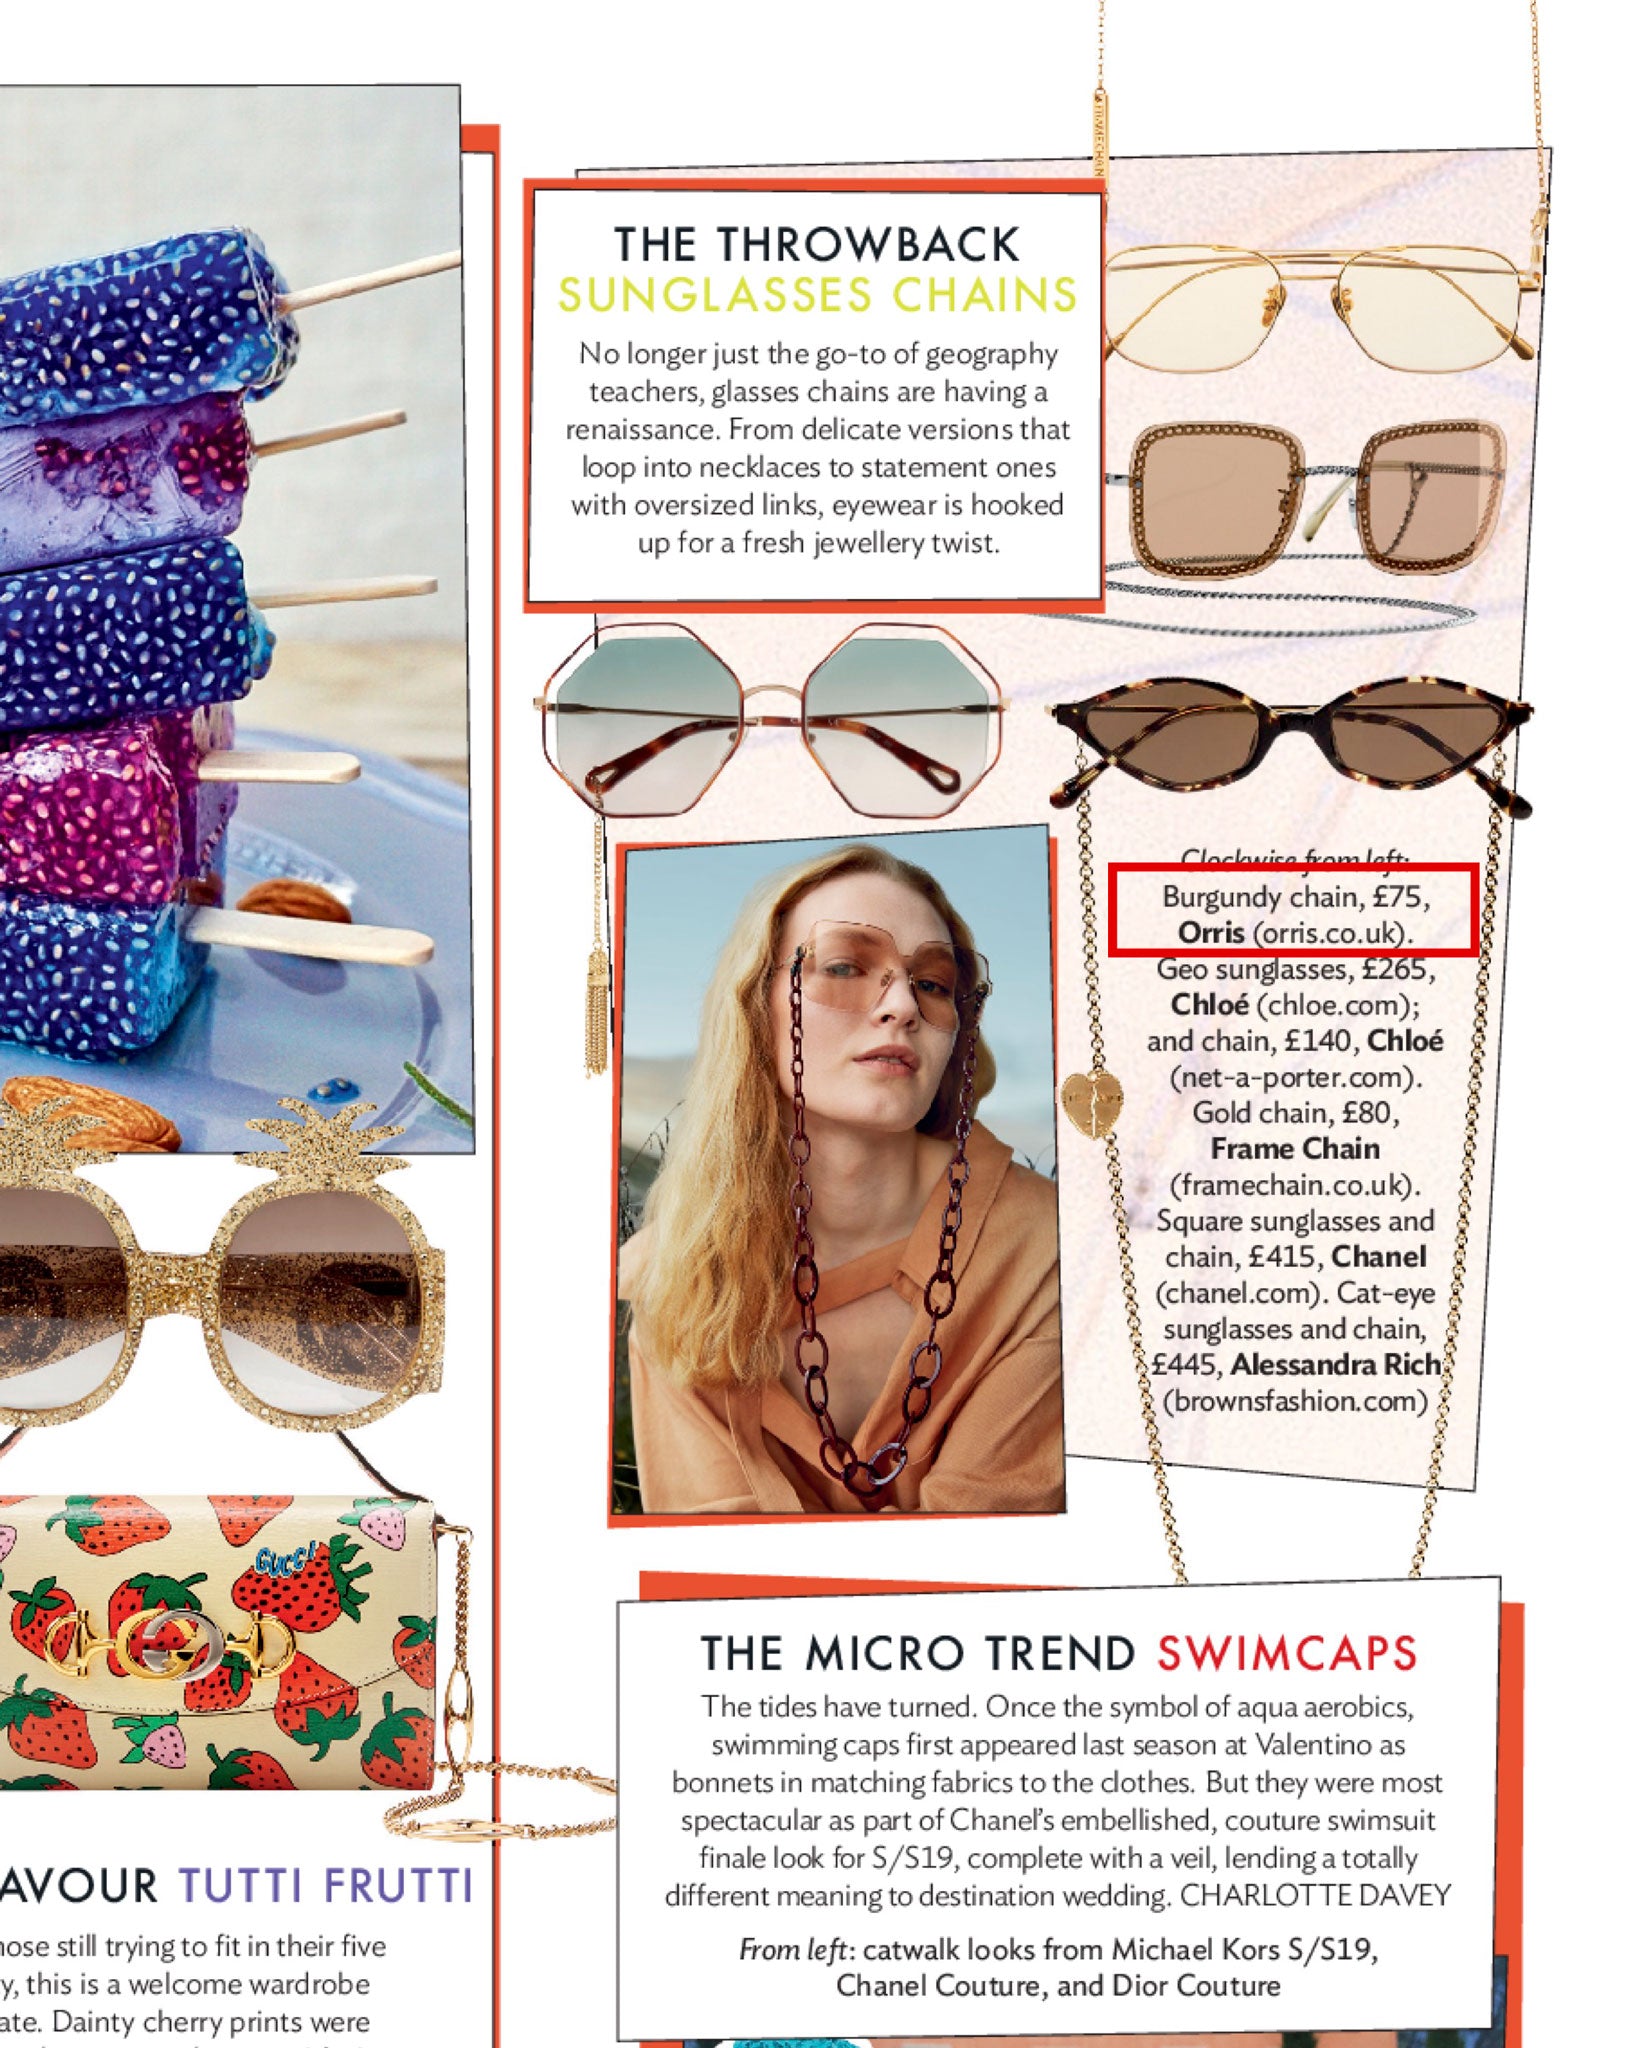 "Glasses chains are having a renaissance "Glad to see ORRIS glasses chain is featured in Condé Nast Traveller UK 